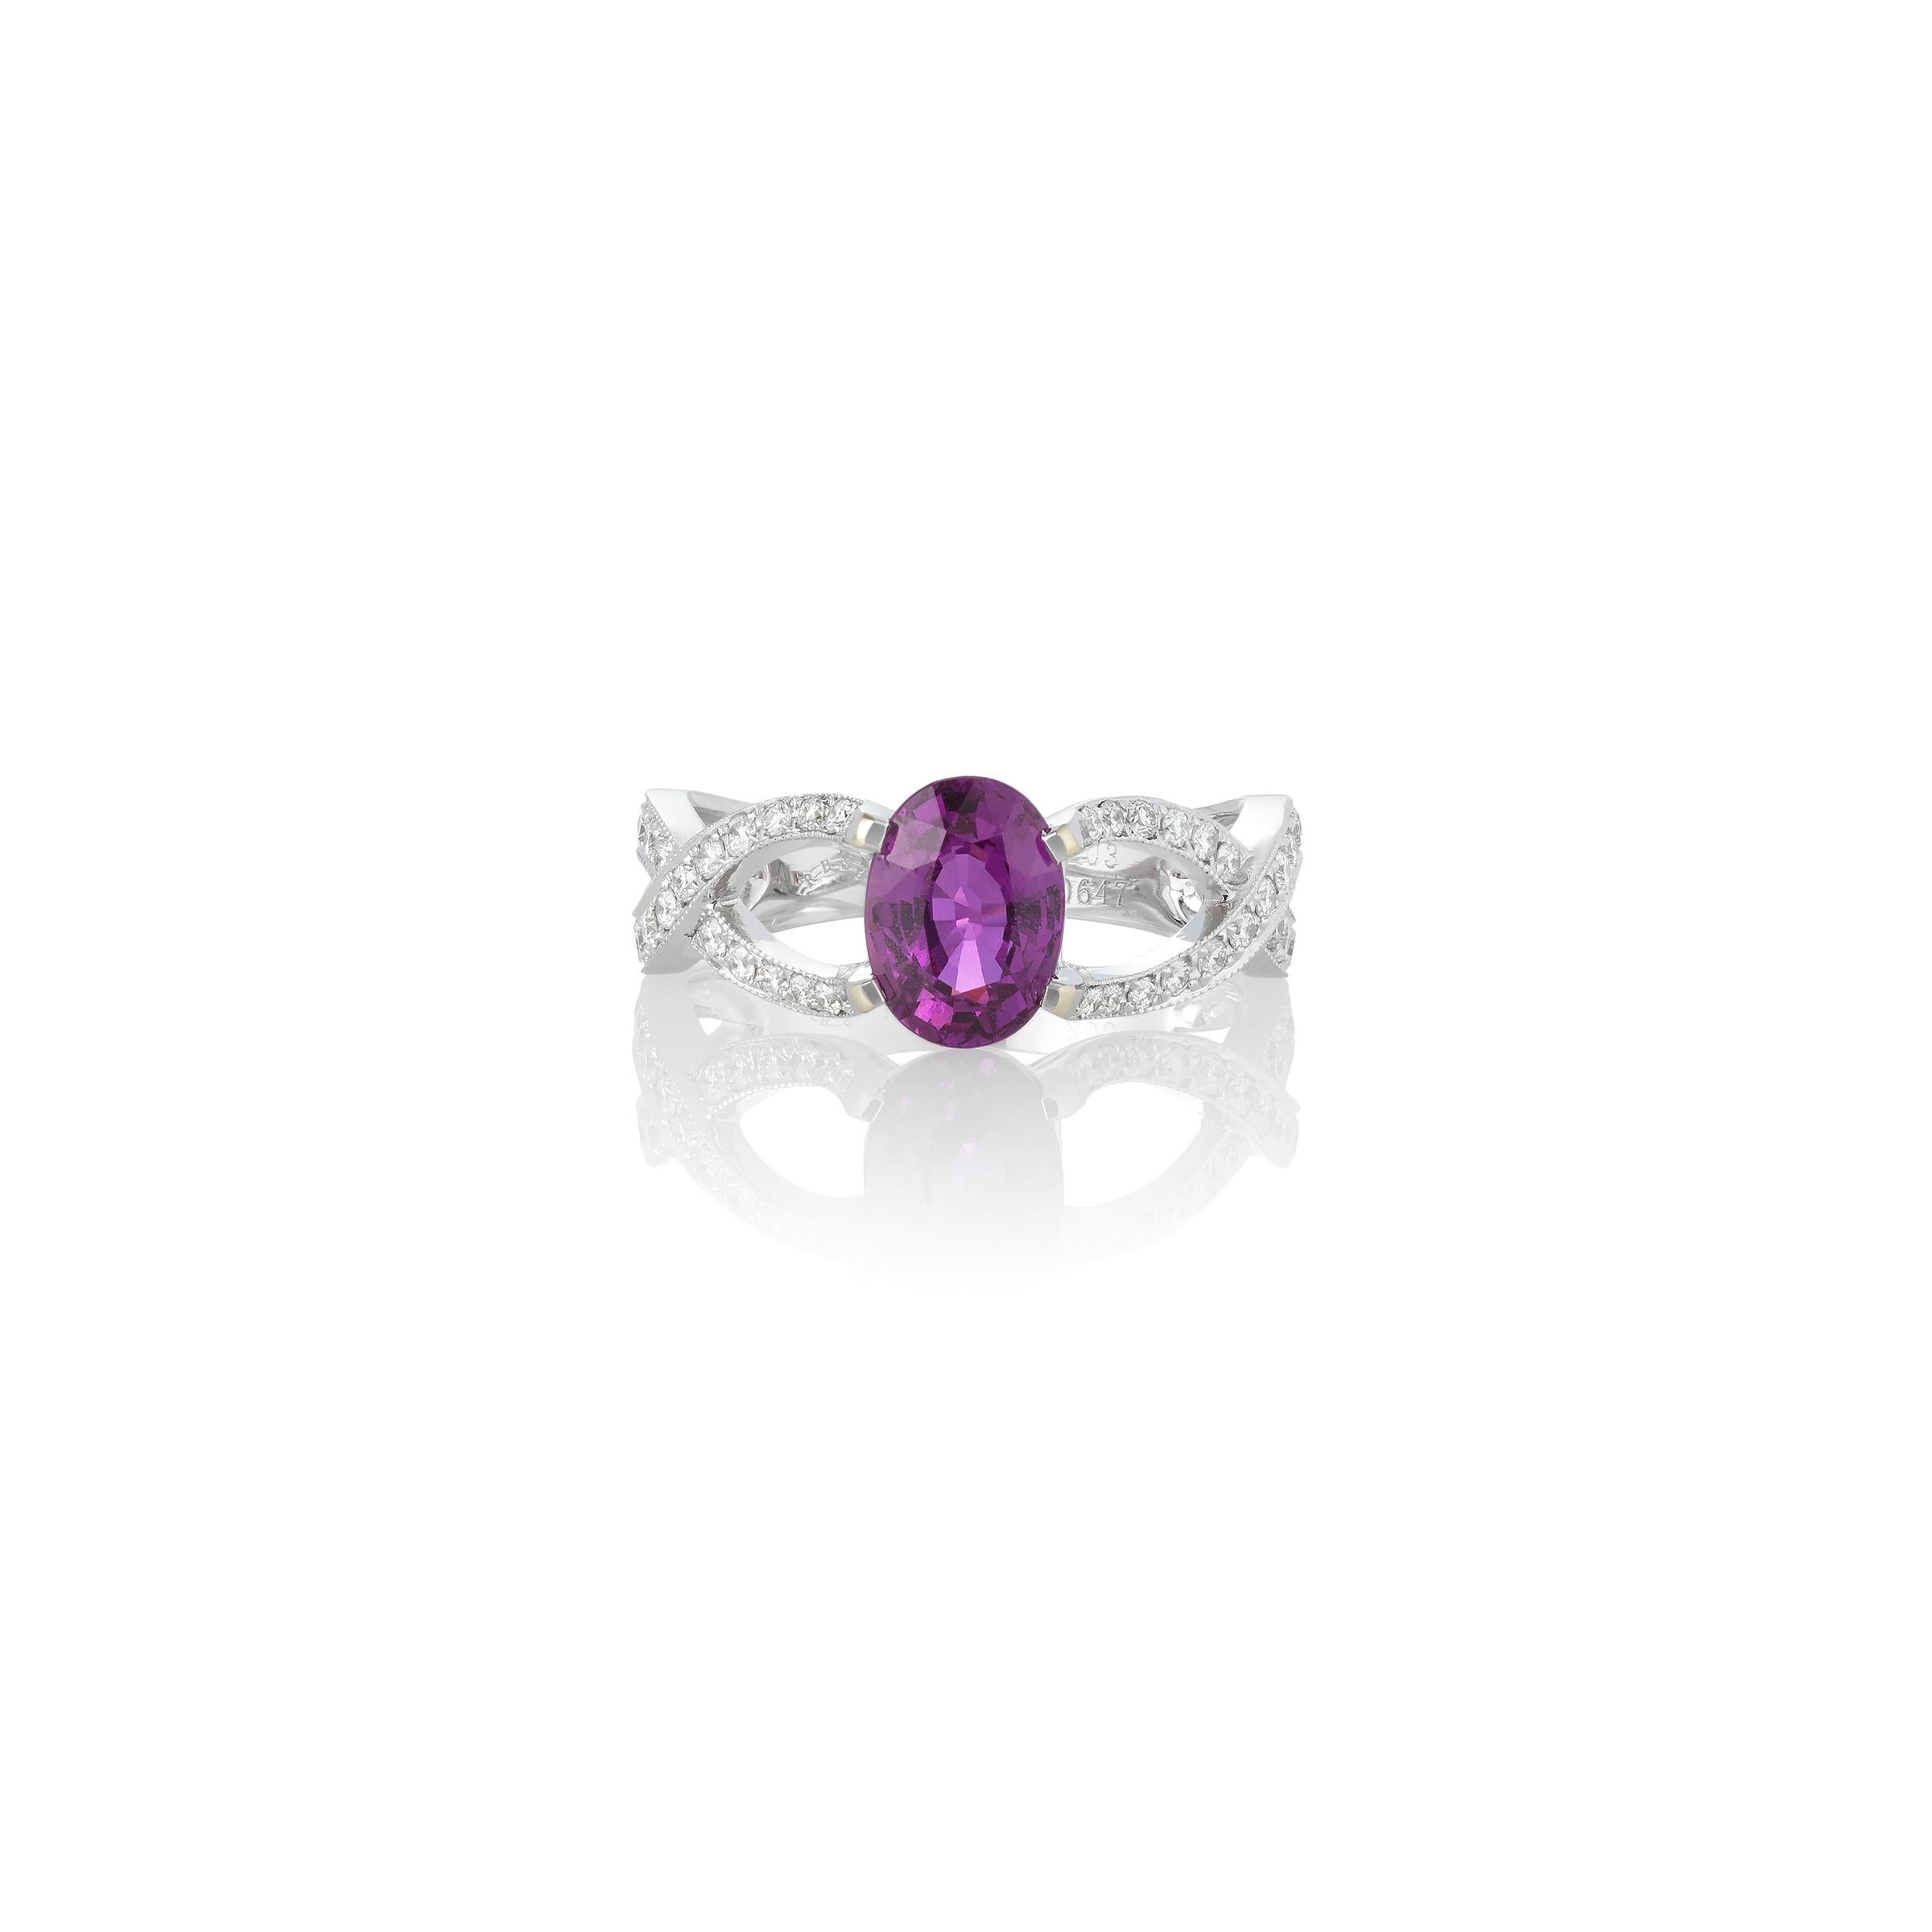 18K White Gold 2.03CTW Oval Pink Sapphire Ring with 0.65CTW Round Accent Diamonds. Designed by color Sapphire specialist, Michael Couch & Associates, this ring beautifully showcases the vibrancy of the pink center Sapphire. The ring is currently a